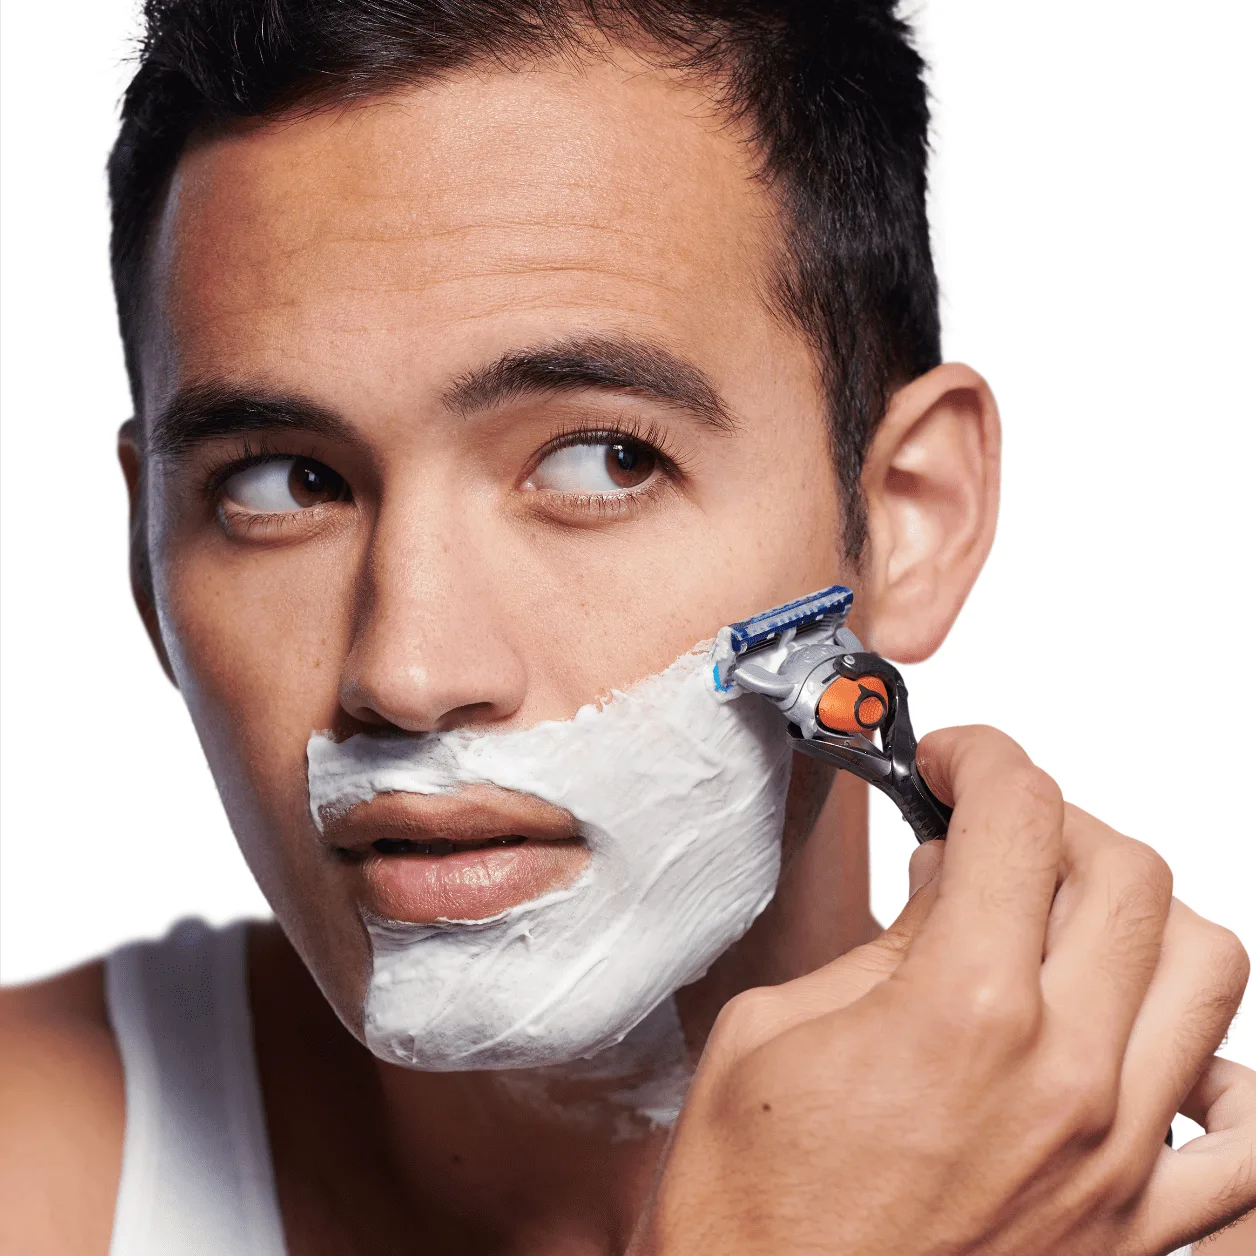 Smooth shave with less irritation